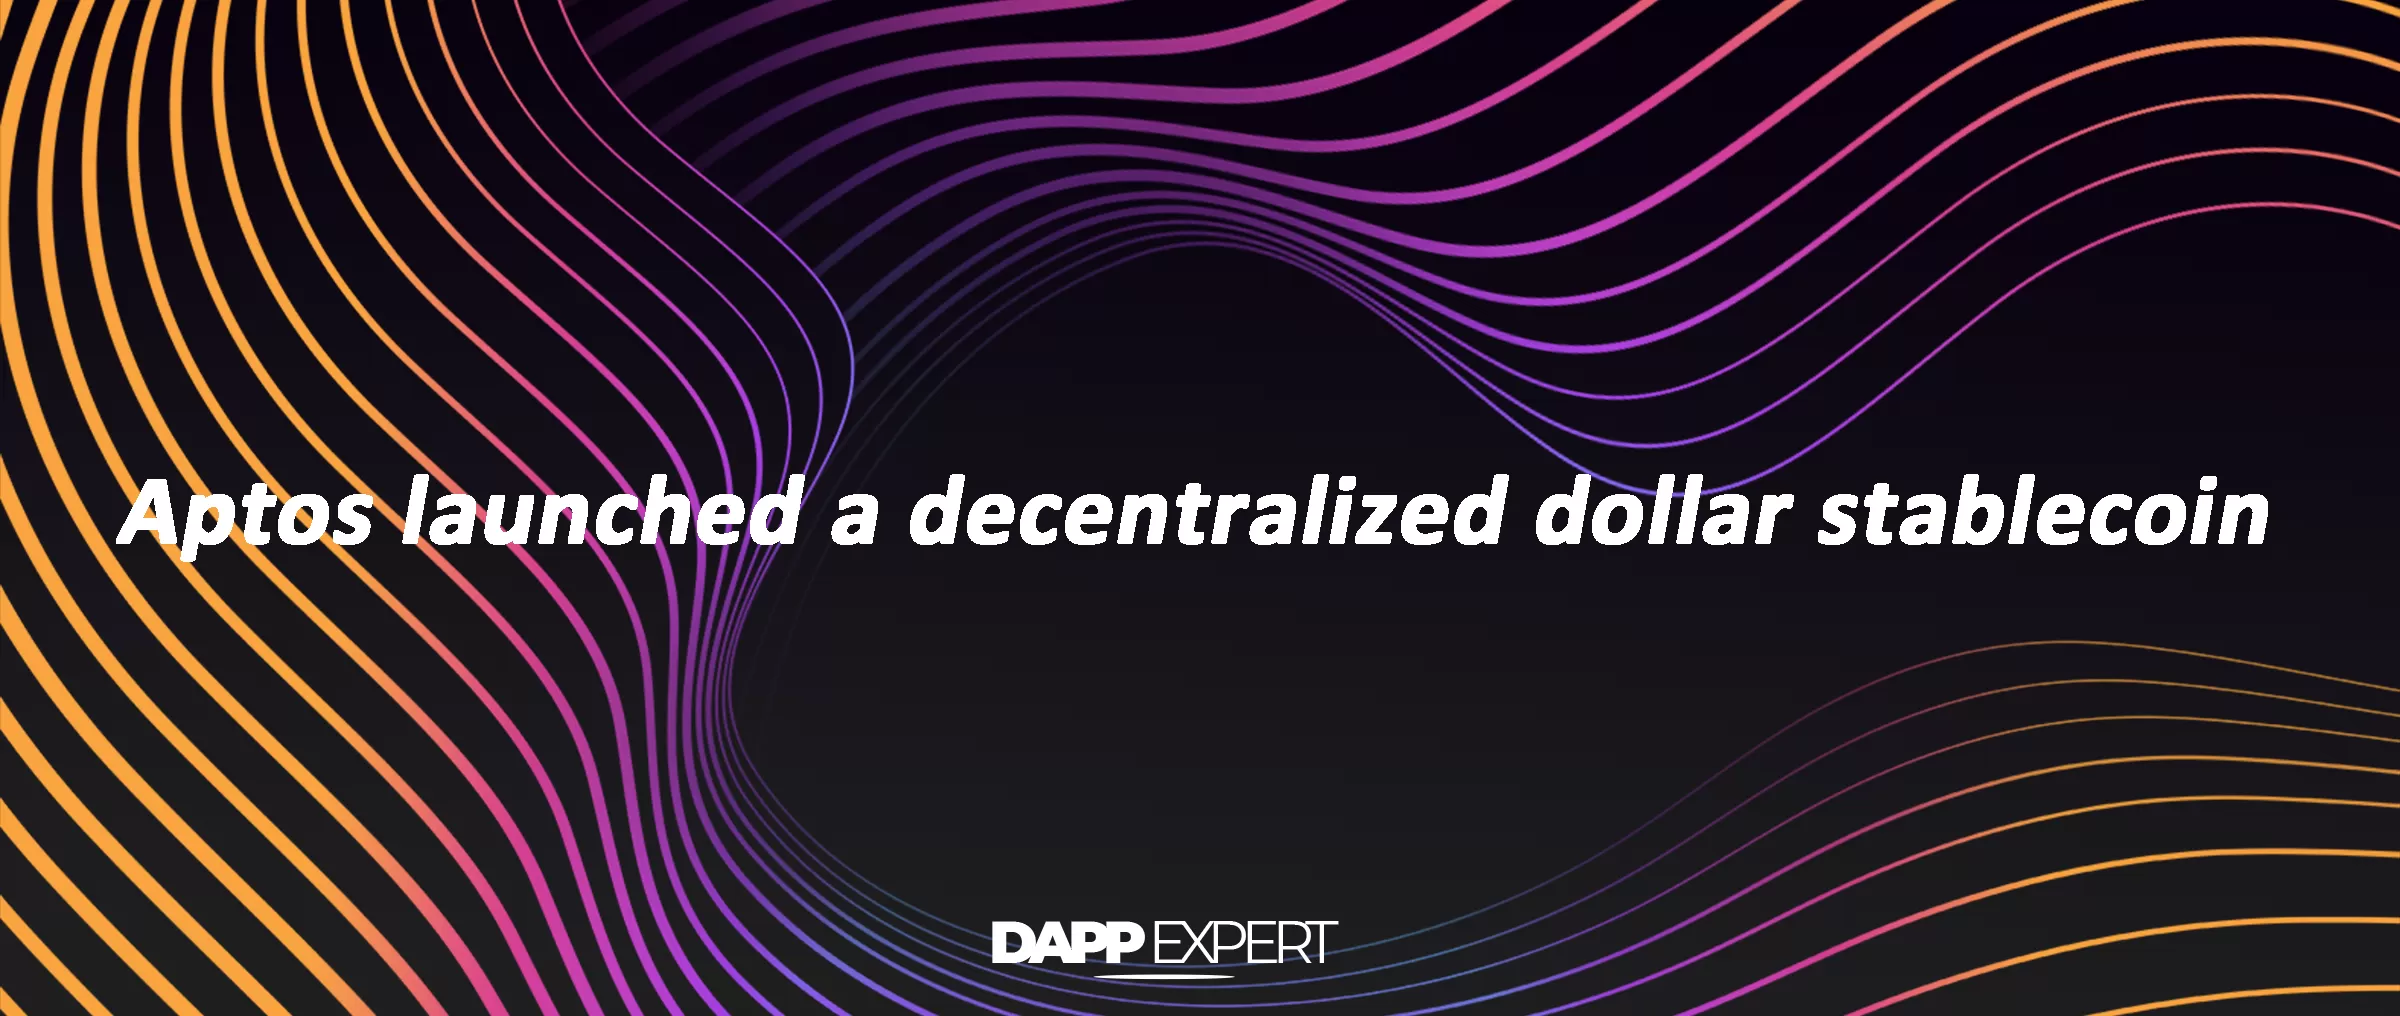 Aptos launched a decentralized dollar stablecoin